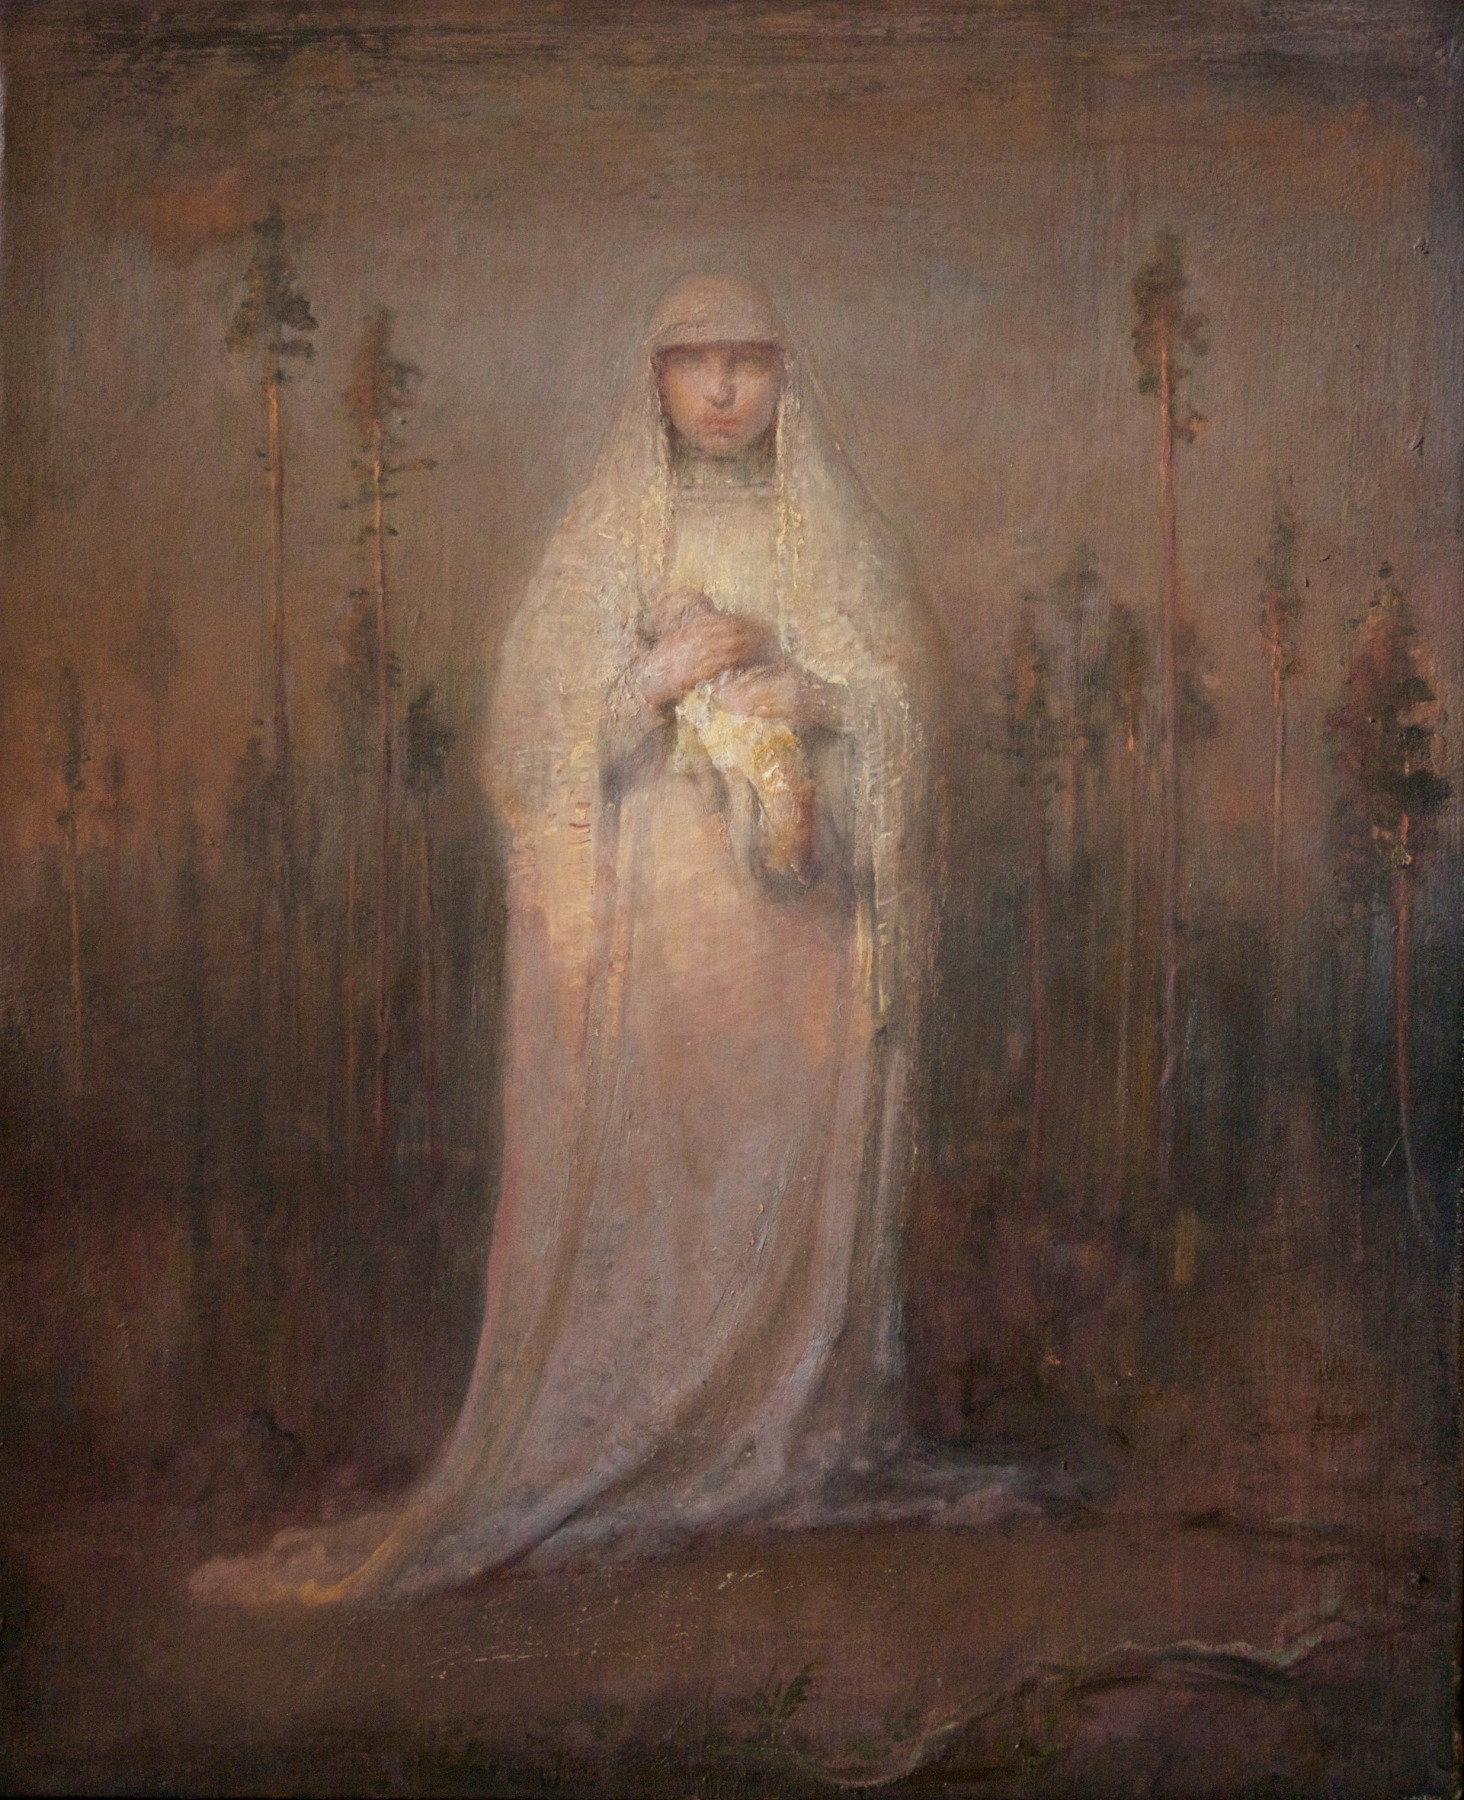 Odd Nerdrum, Bride with a Doll, oil on canvas, 25 1/2 x 21 1/2 inches